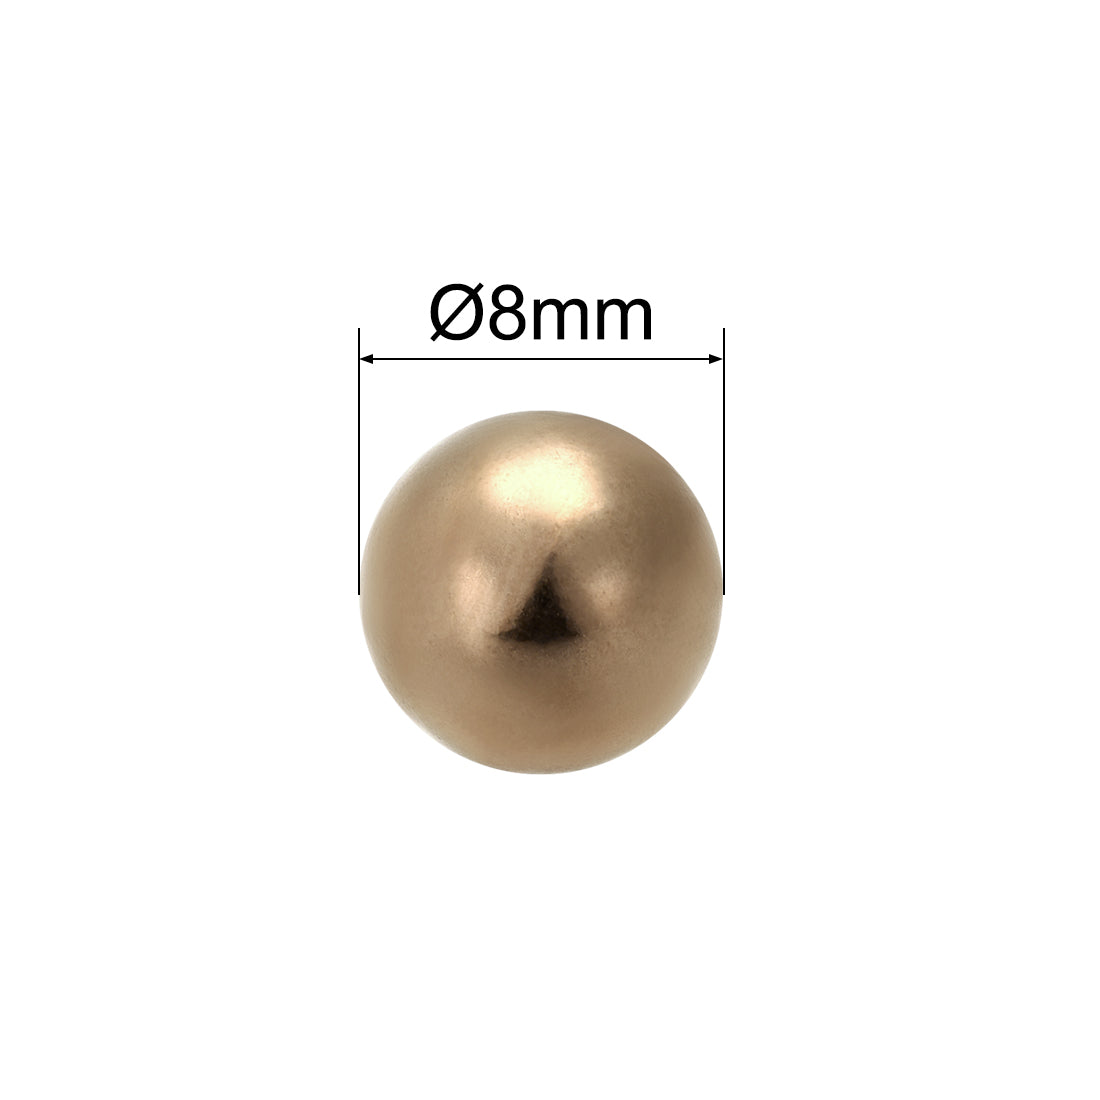 Uxcell Uxcell 6mm Precision Solid Brass Bearing Balls 20pcs